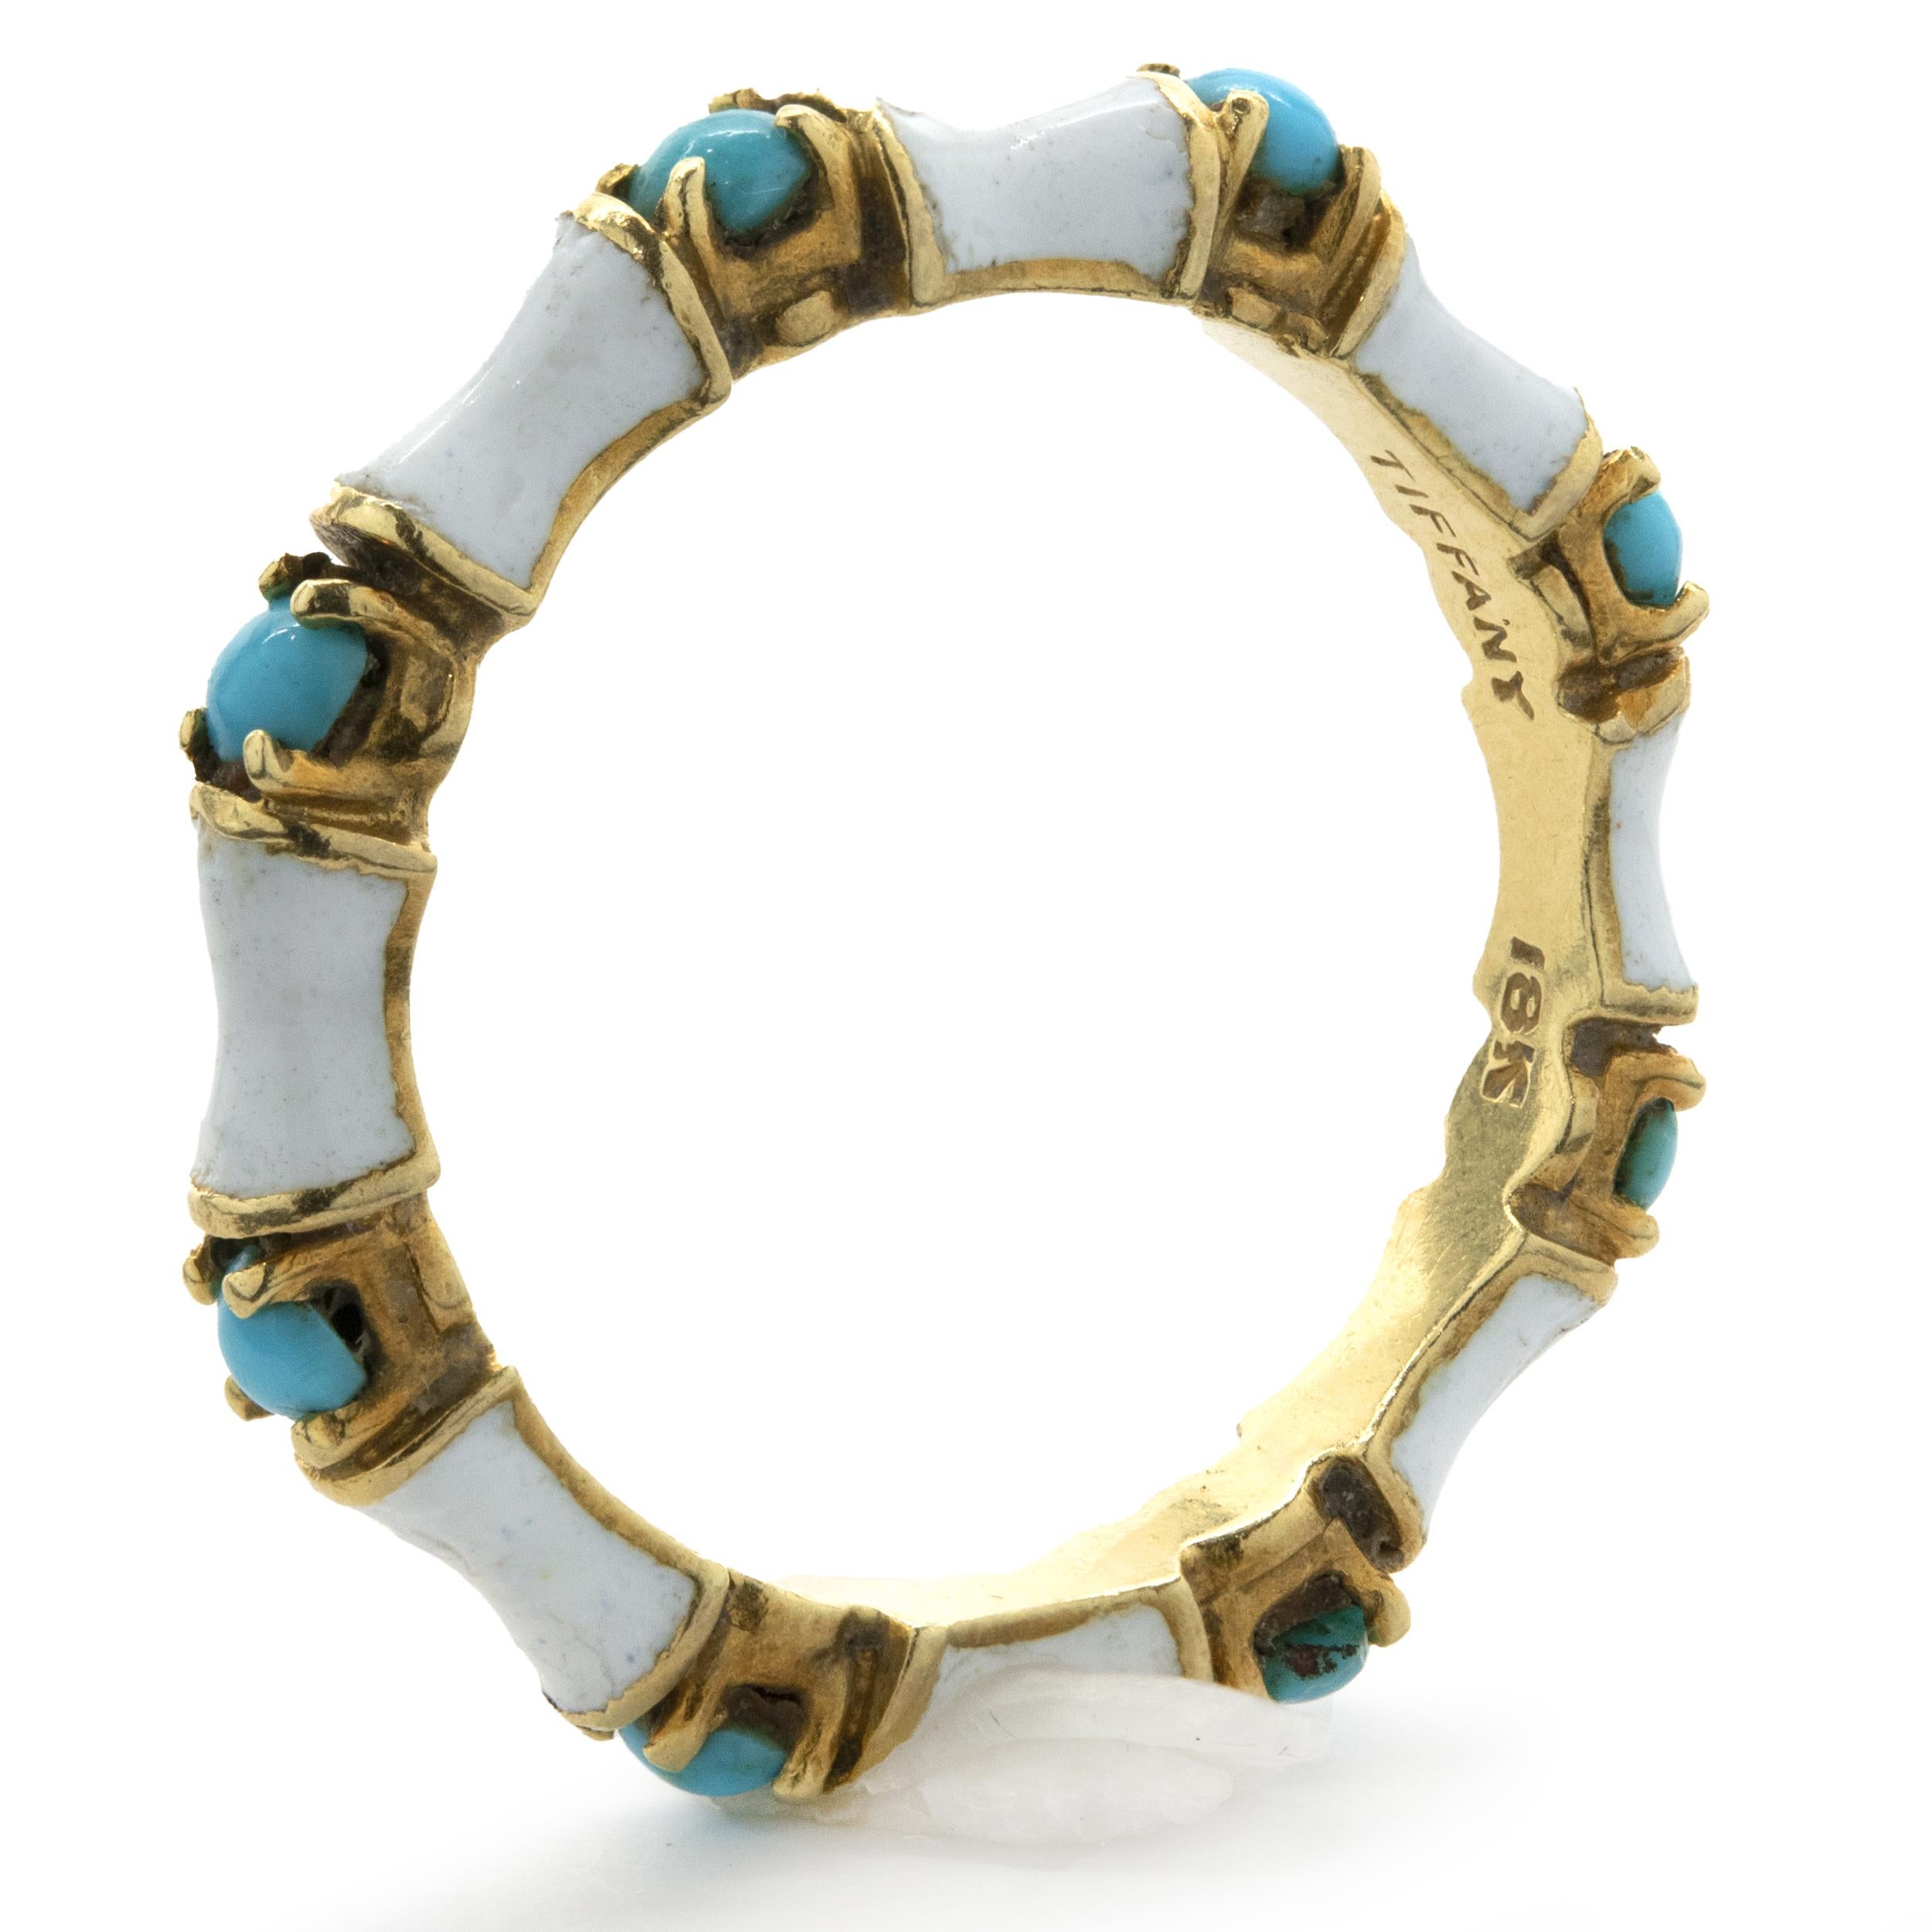 Designer: Tiffany & Co. / Sclumberger
Material: 18K yellow gold
Dimensions: band measures 3.5mm wide
Size: 8
Weight: 4.09 grams
